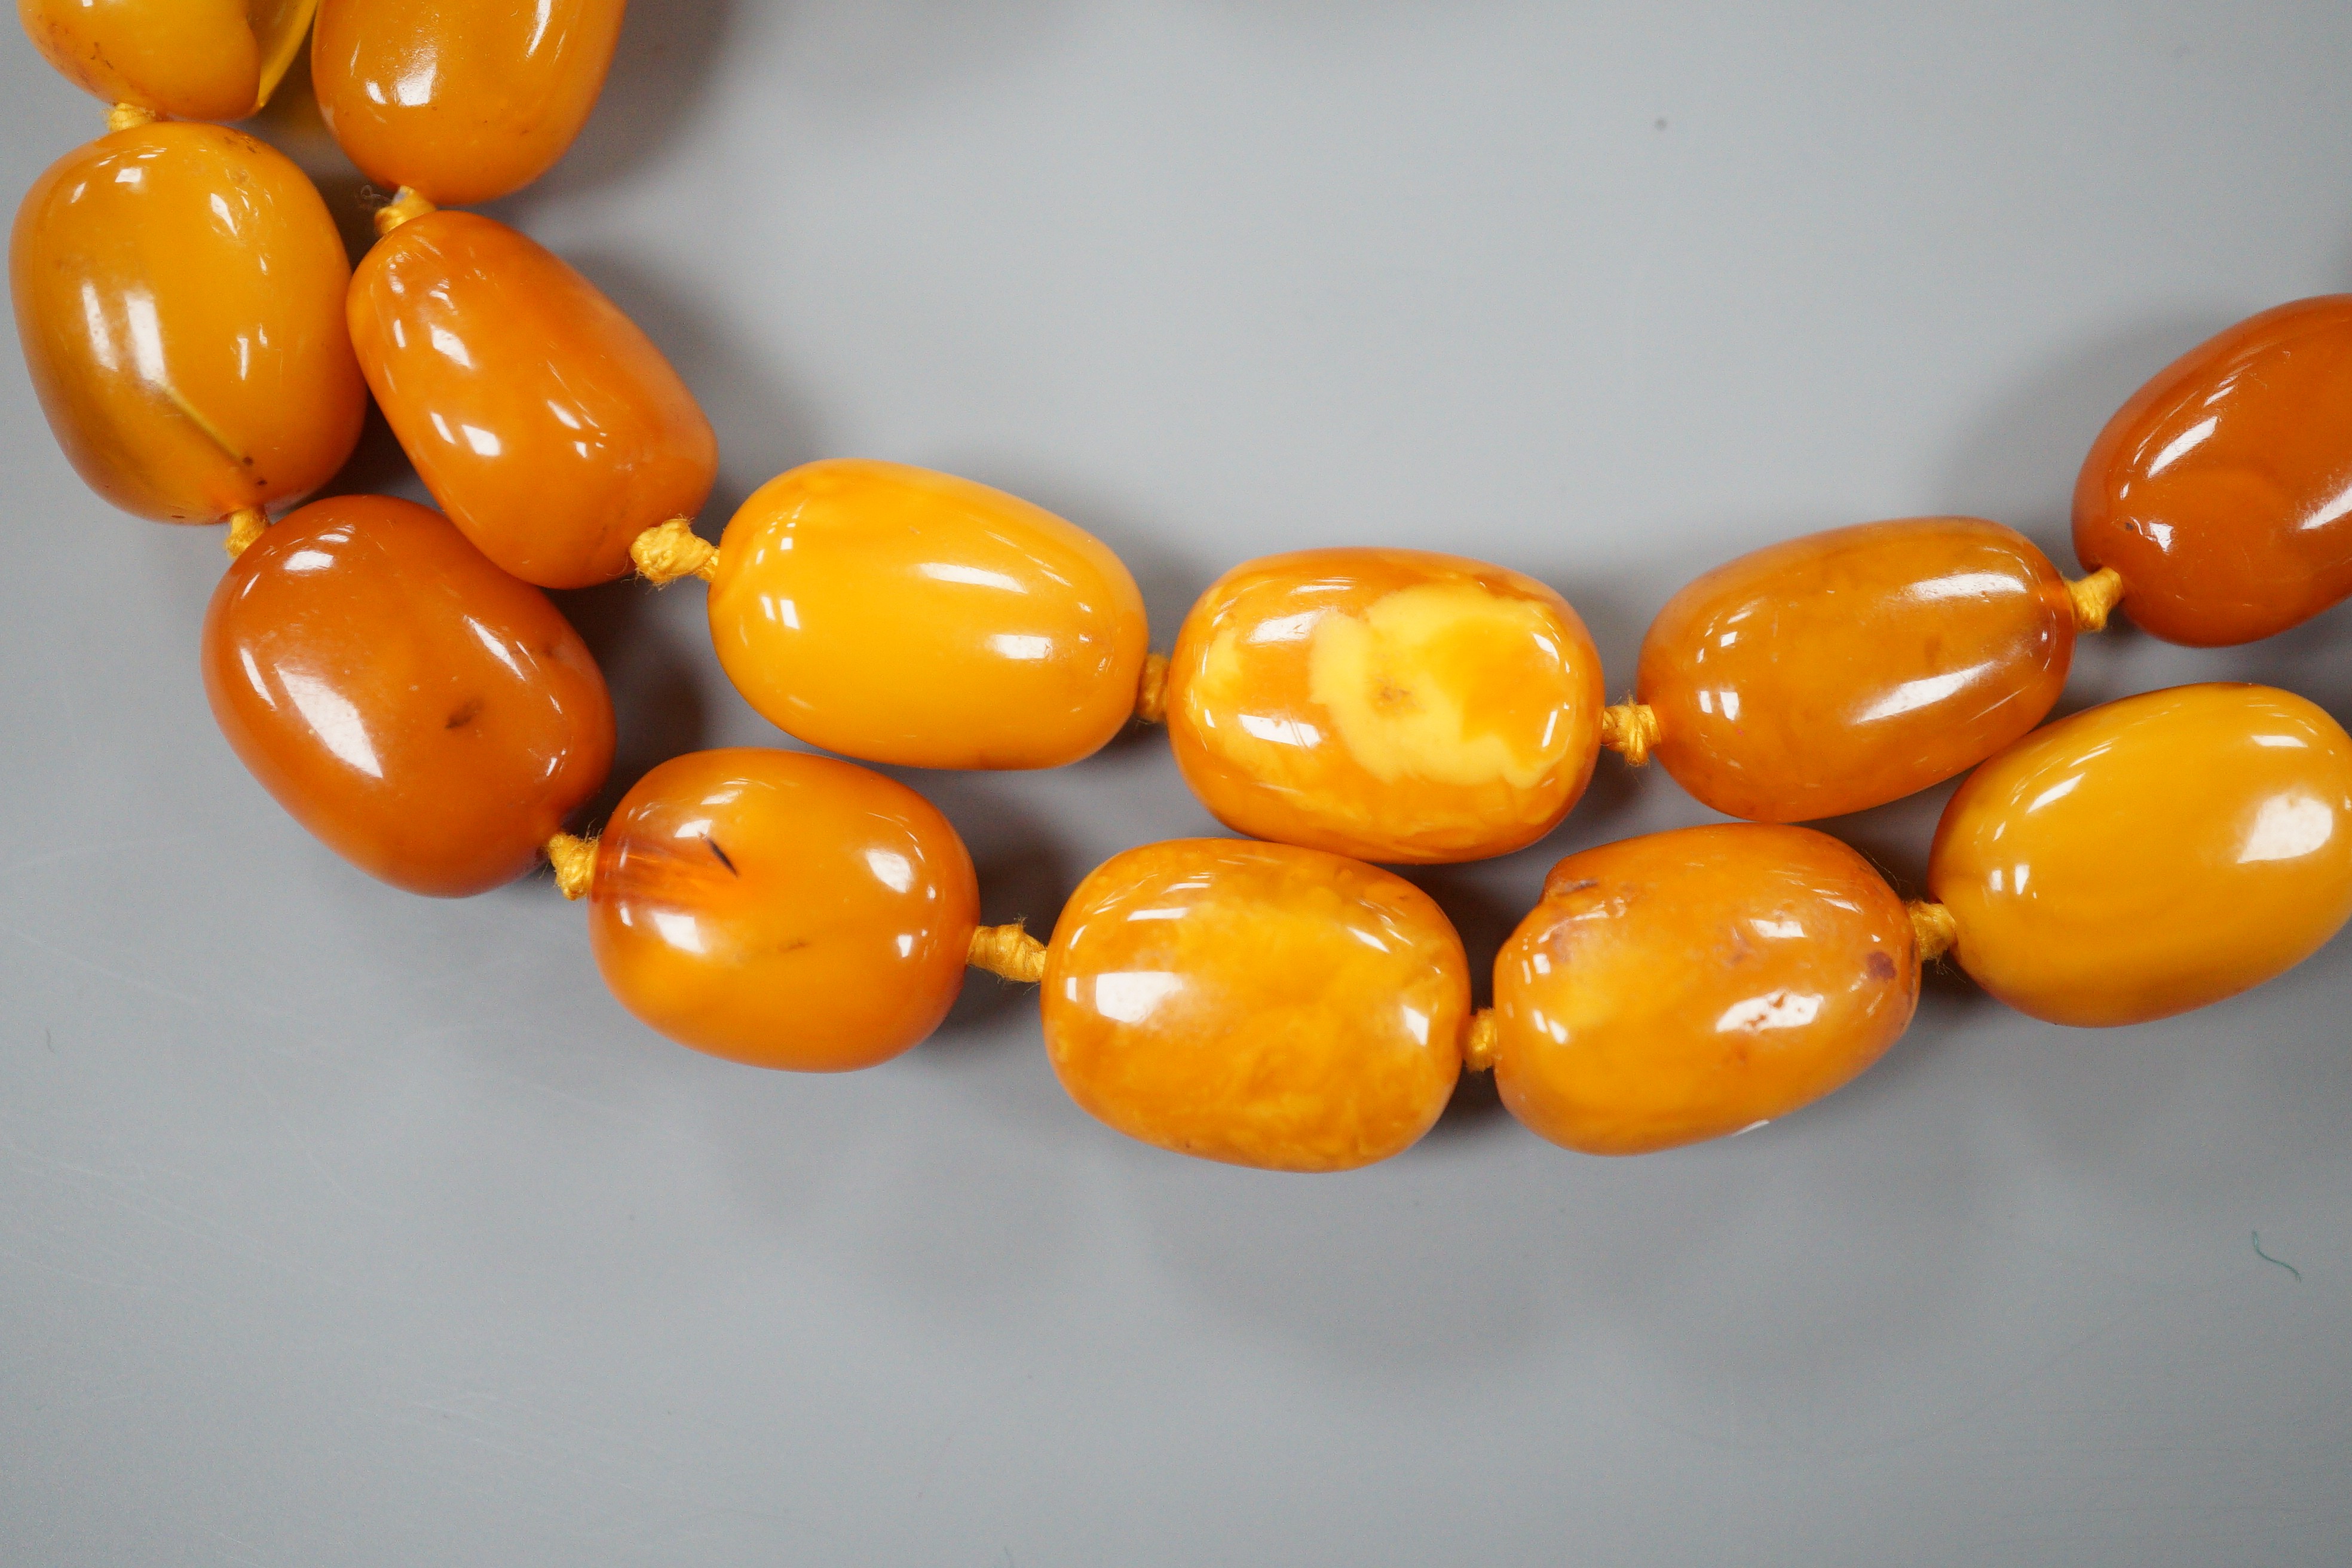 A single strand oval amber bead necklace, 90cm, gross 81 grams